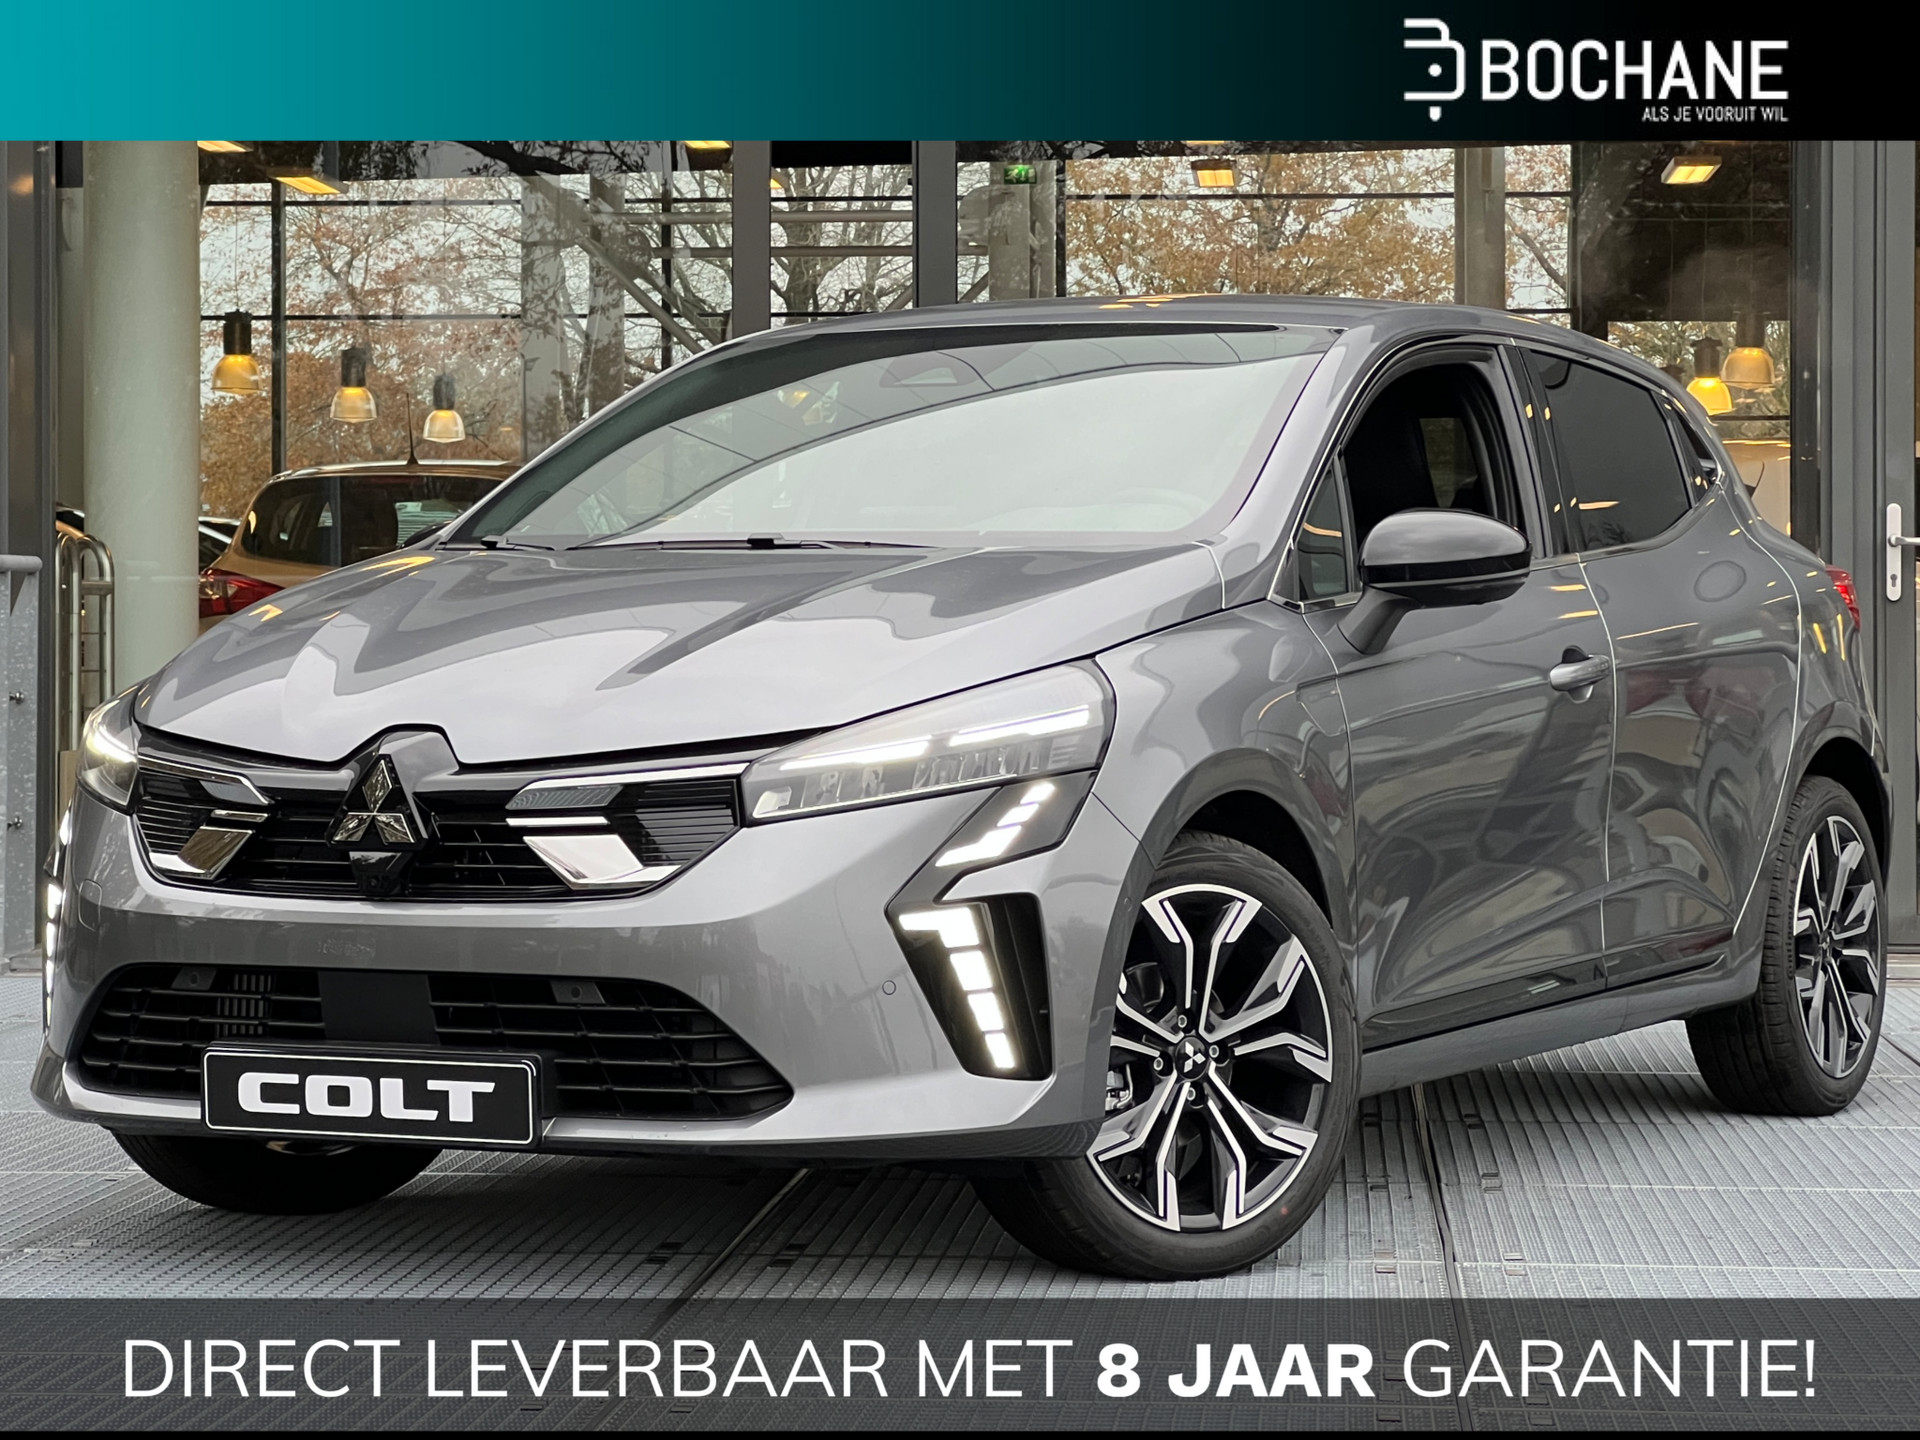 Mitsubishi Colt 1.0T MT Instyle | Draadloos Apple Carplay / Android Auto | Adap. Cruise Control | Climate Control | BOSE | DIRECT UIT VOORRAAD LEVERBAAR! bij viaBOVAG.nl